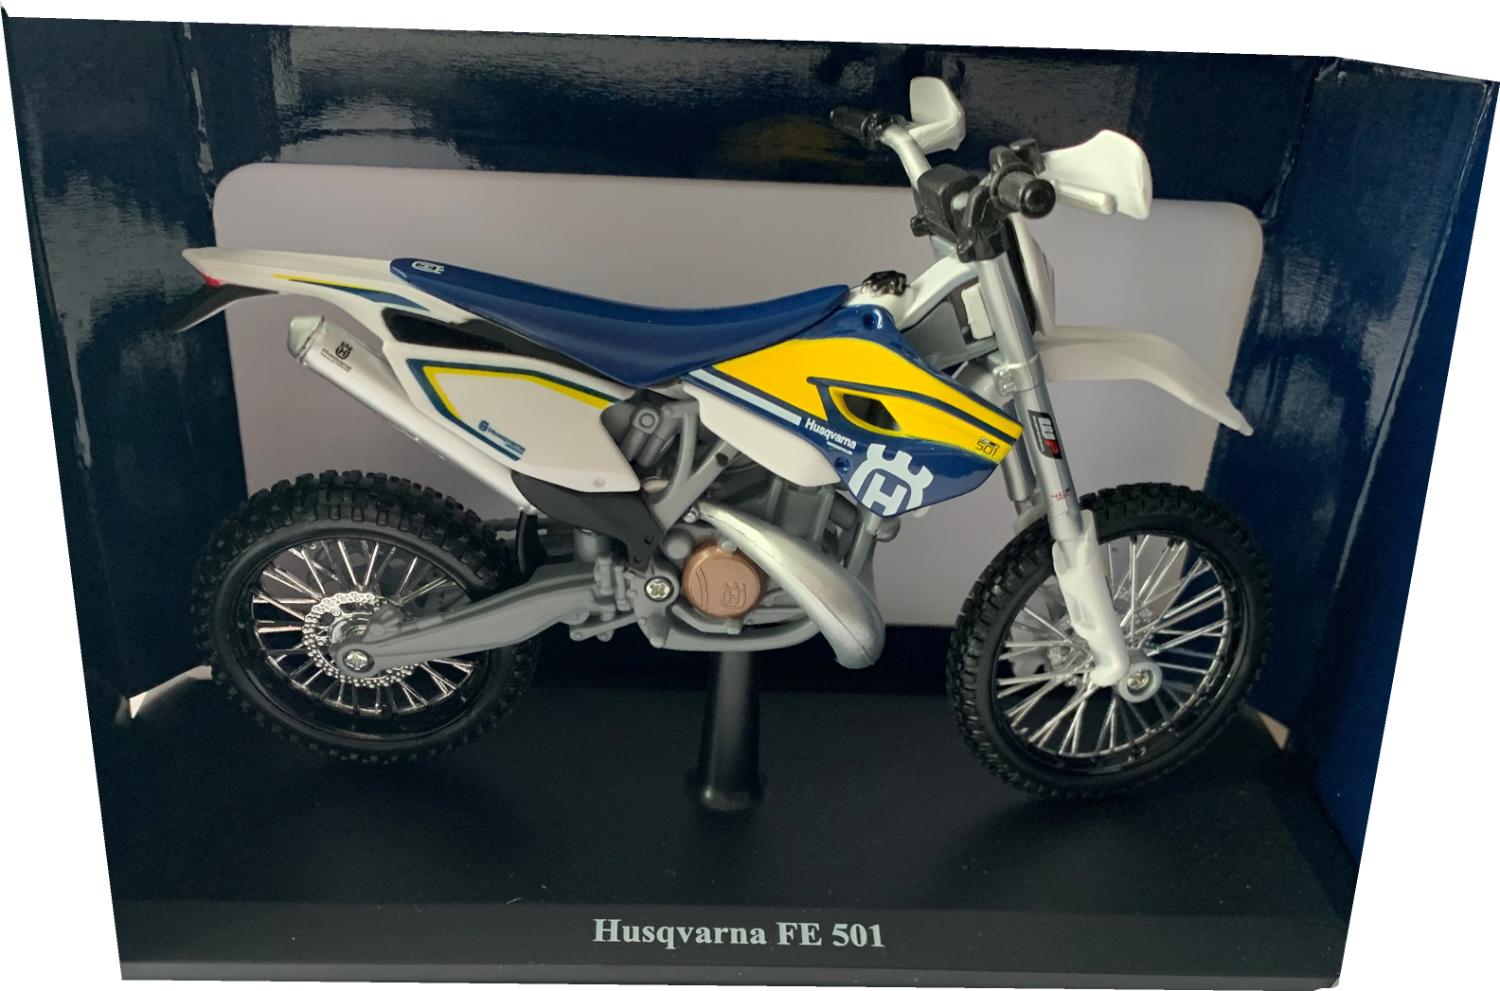 Husqvarna FE 501 in white / blue / yellow 1:12 scale model from Maisto, mounted on a plinth in a Husqvarna themed box